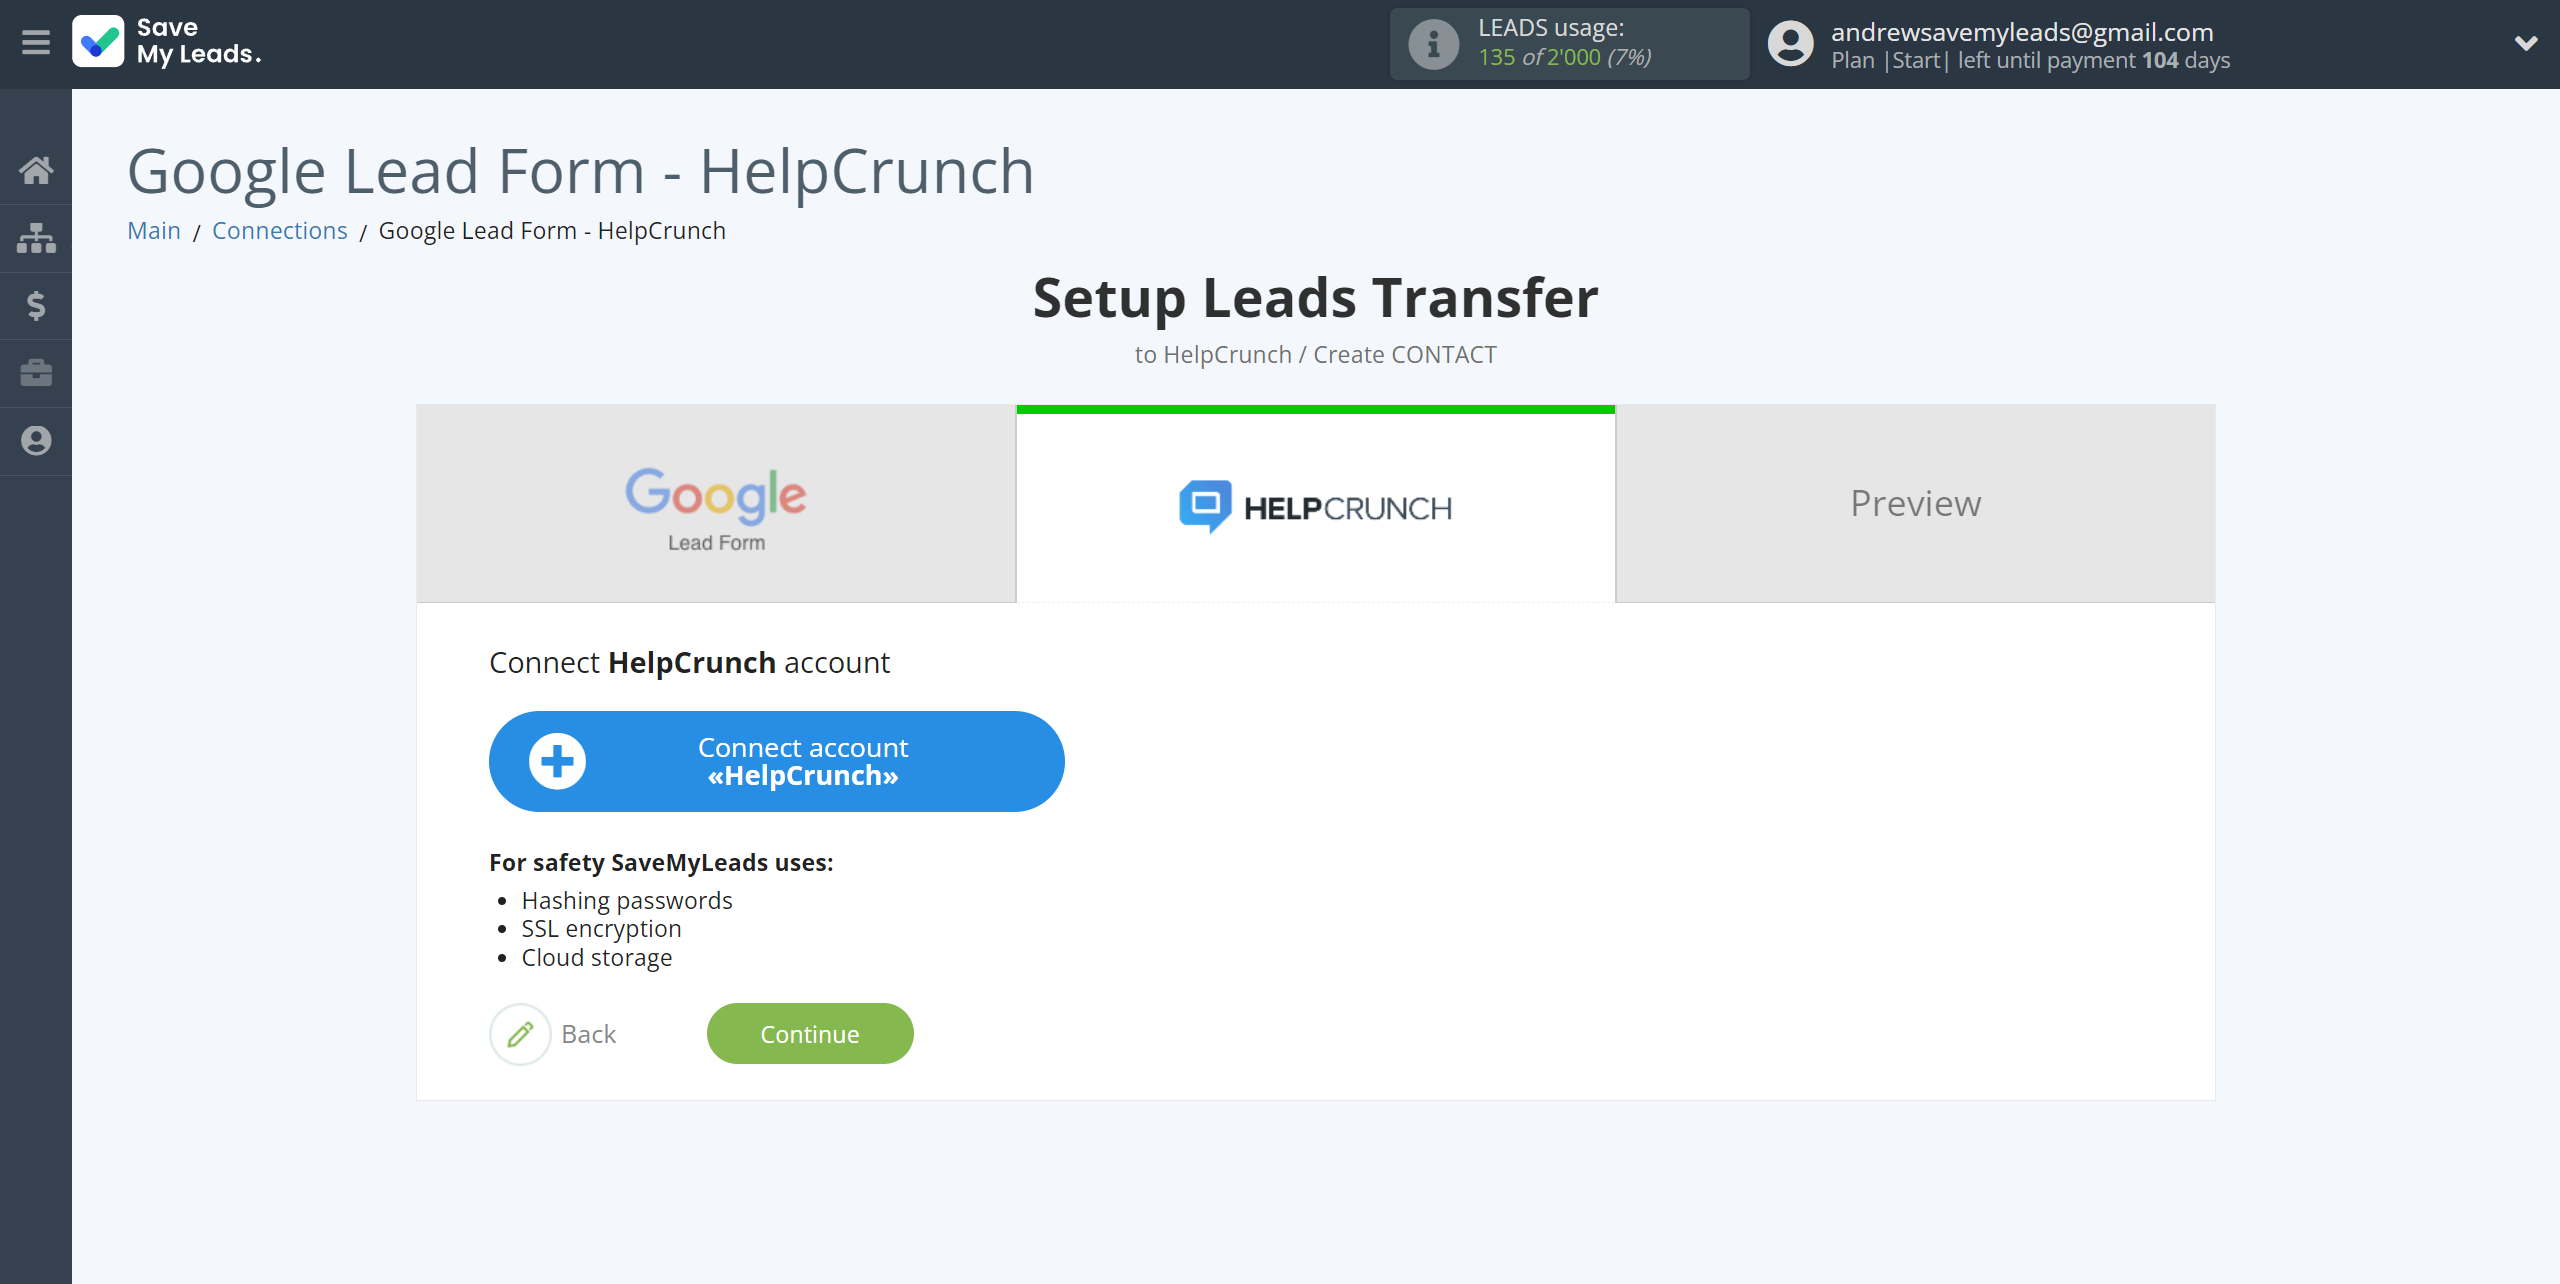 How to Connect Google Lead Form with HelpCrunch Create Contacts | Data Destination account connection